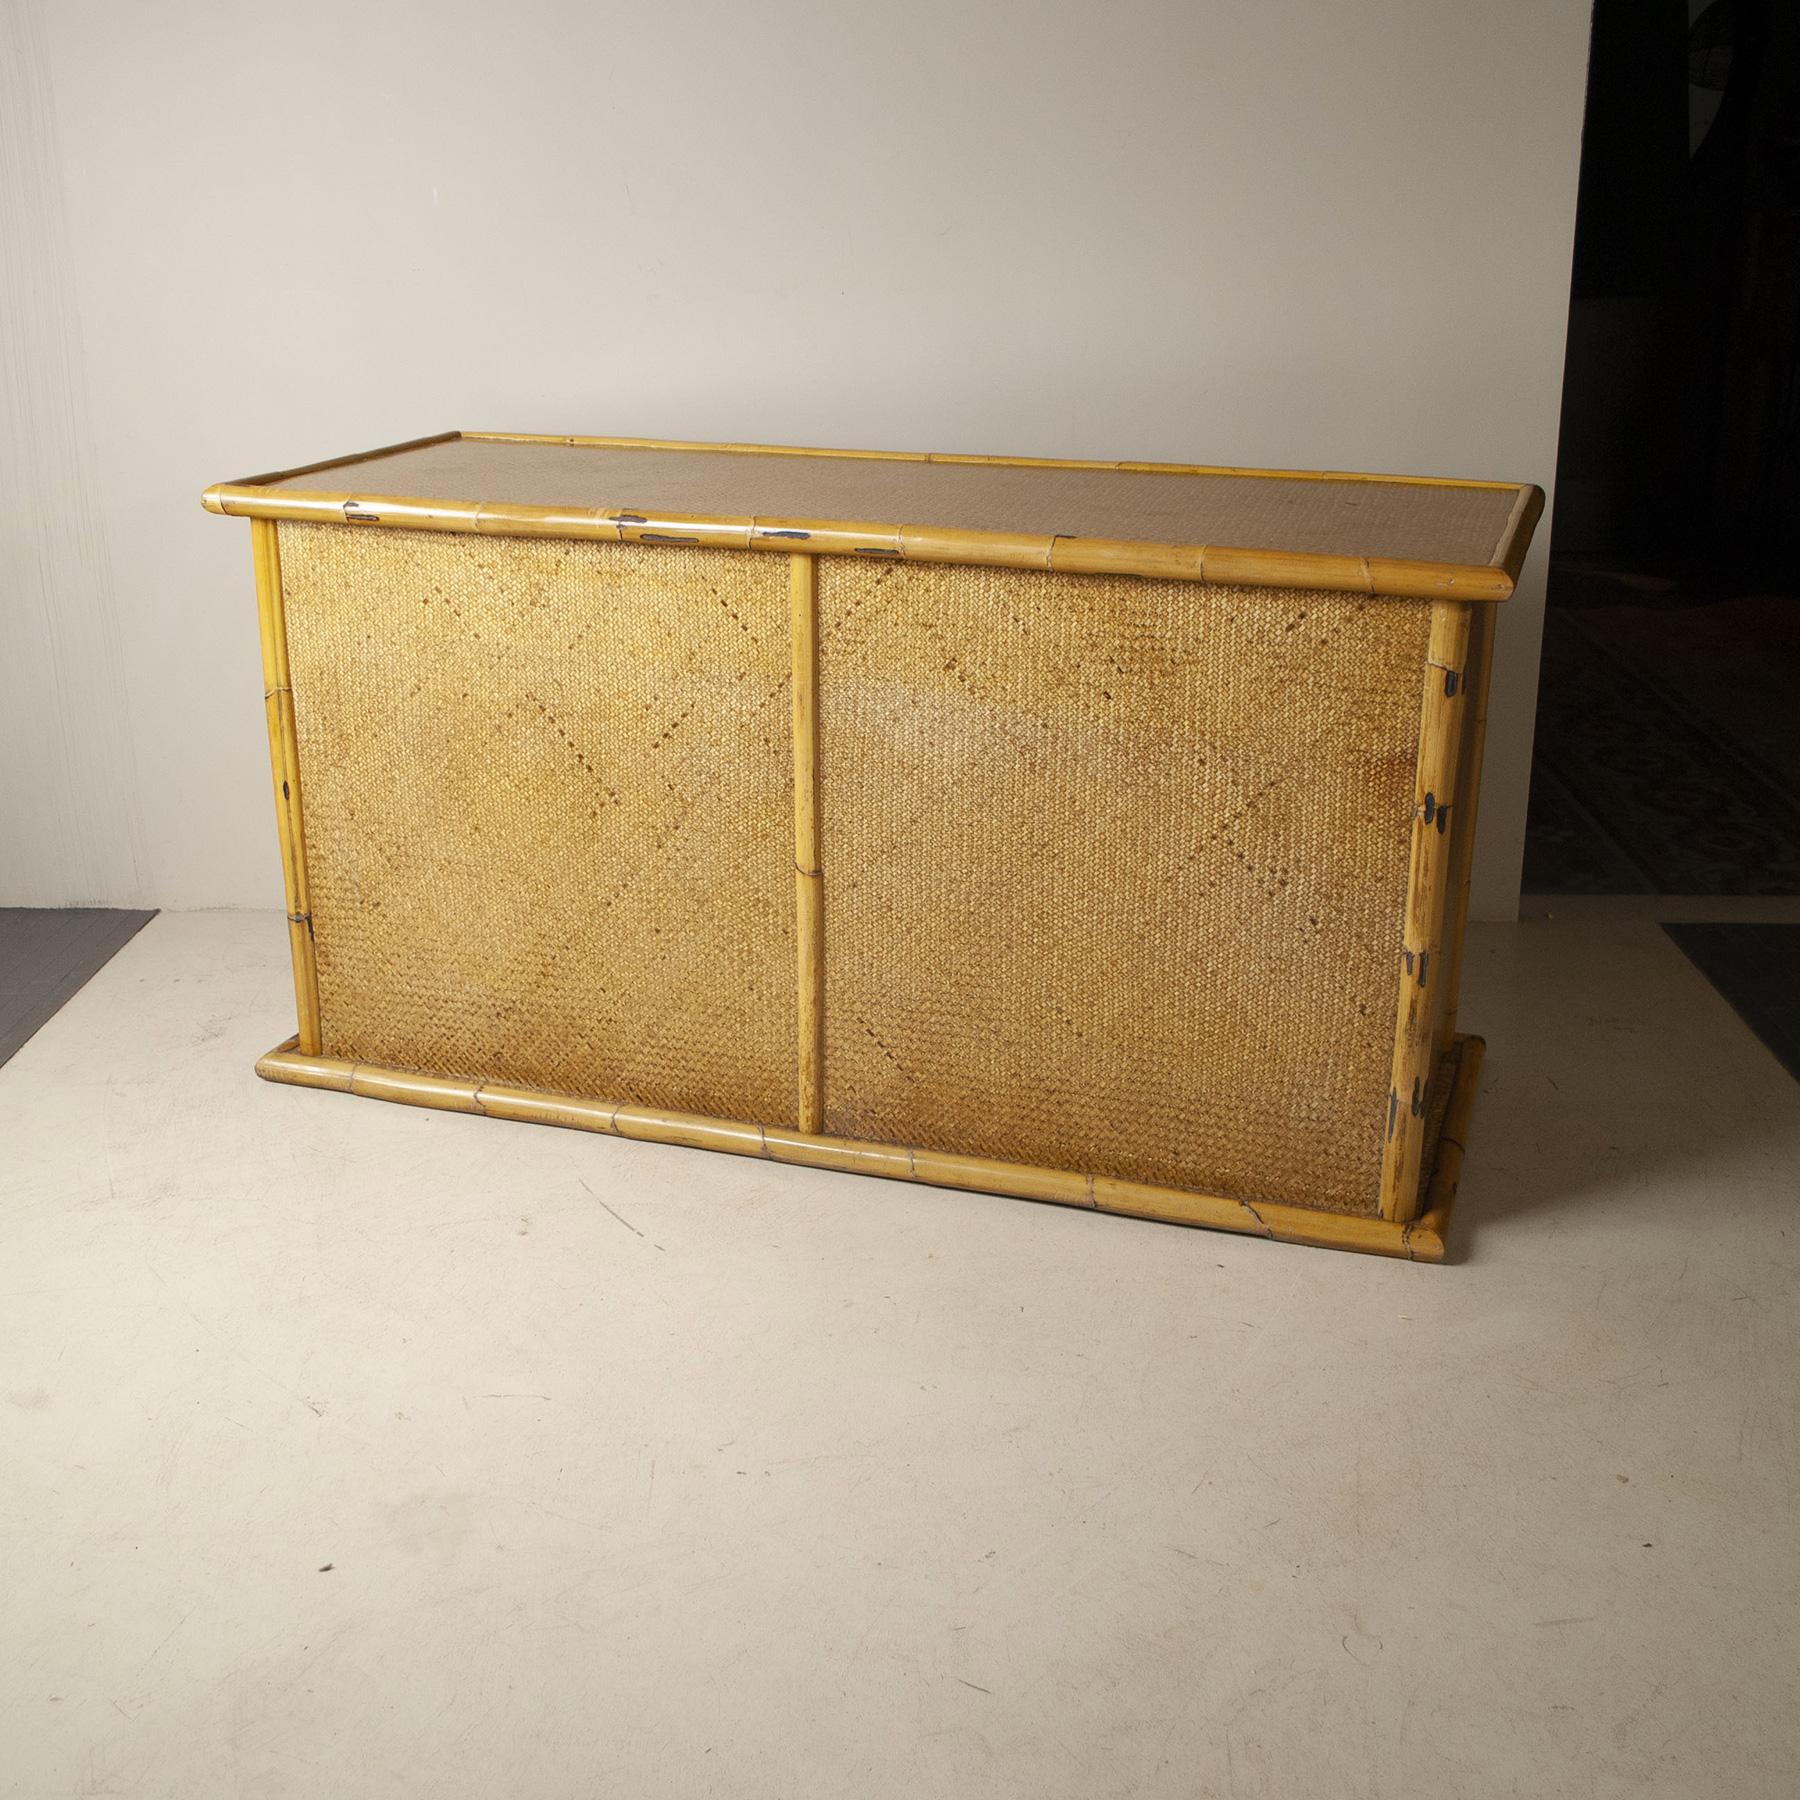 Italian Midcentury Bamboo Sideboard from the Sixties For Sale 1